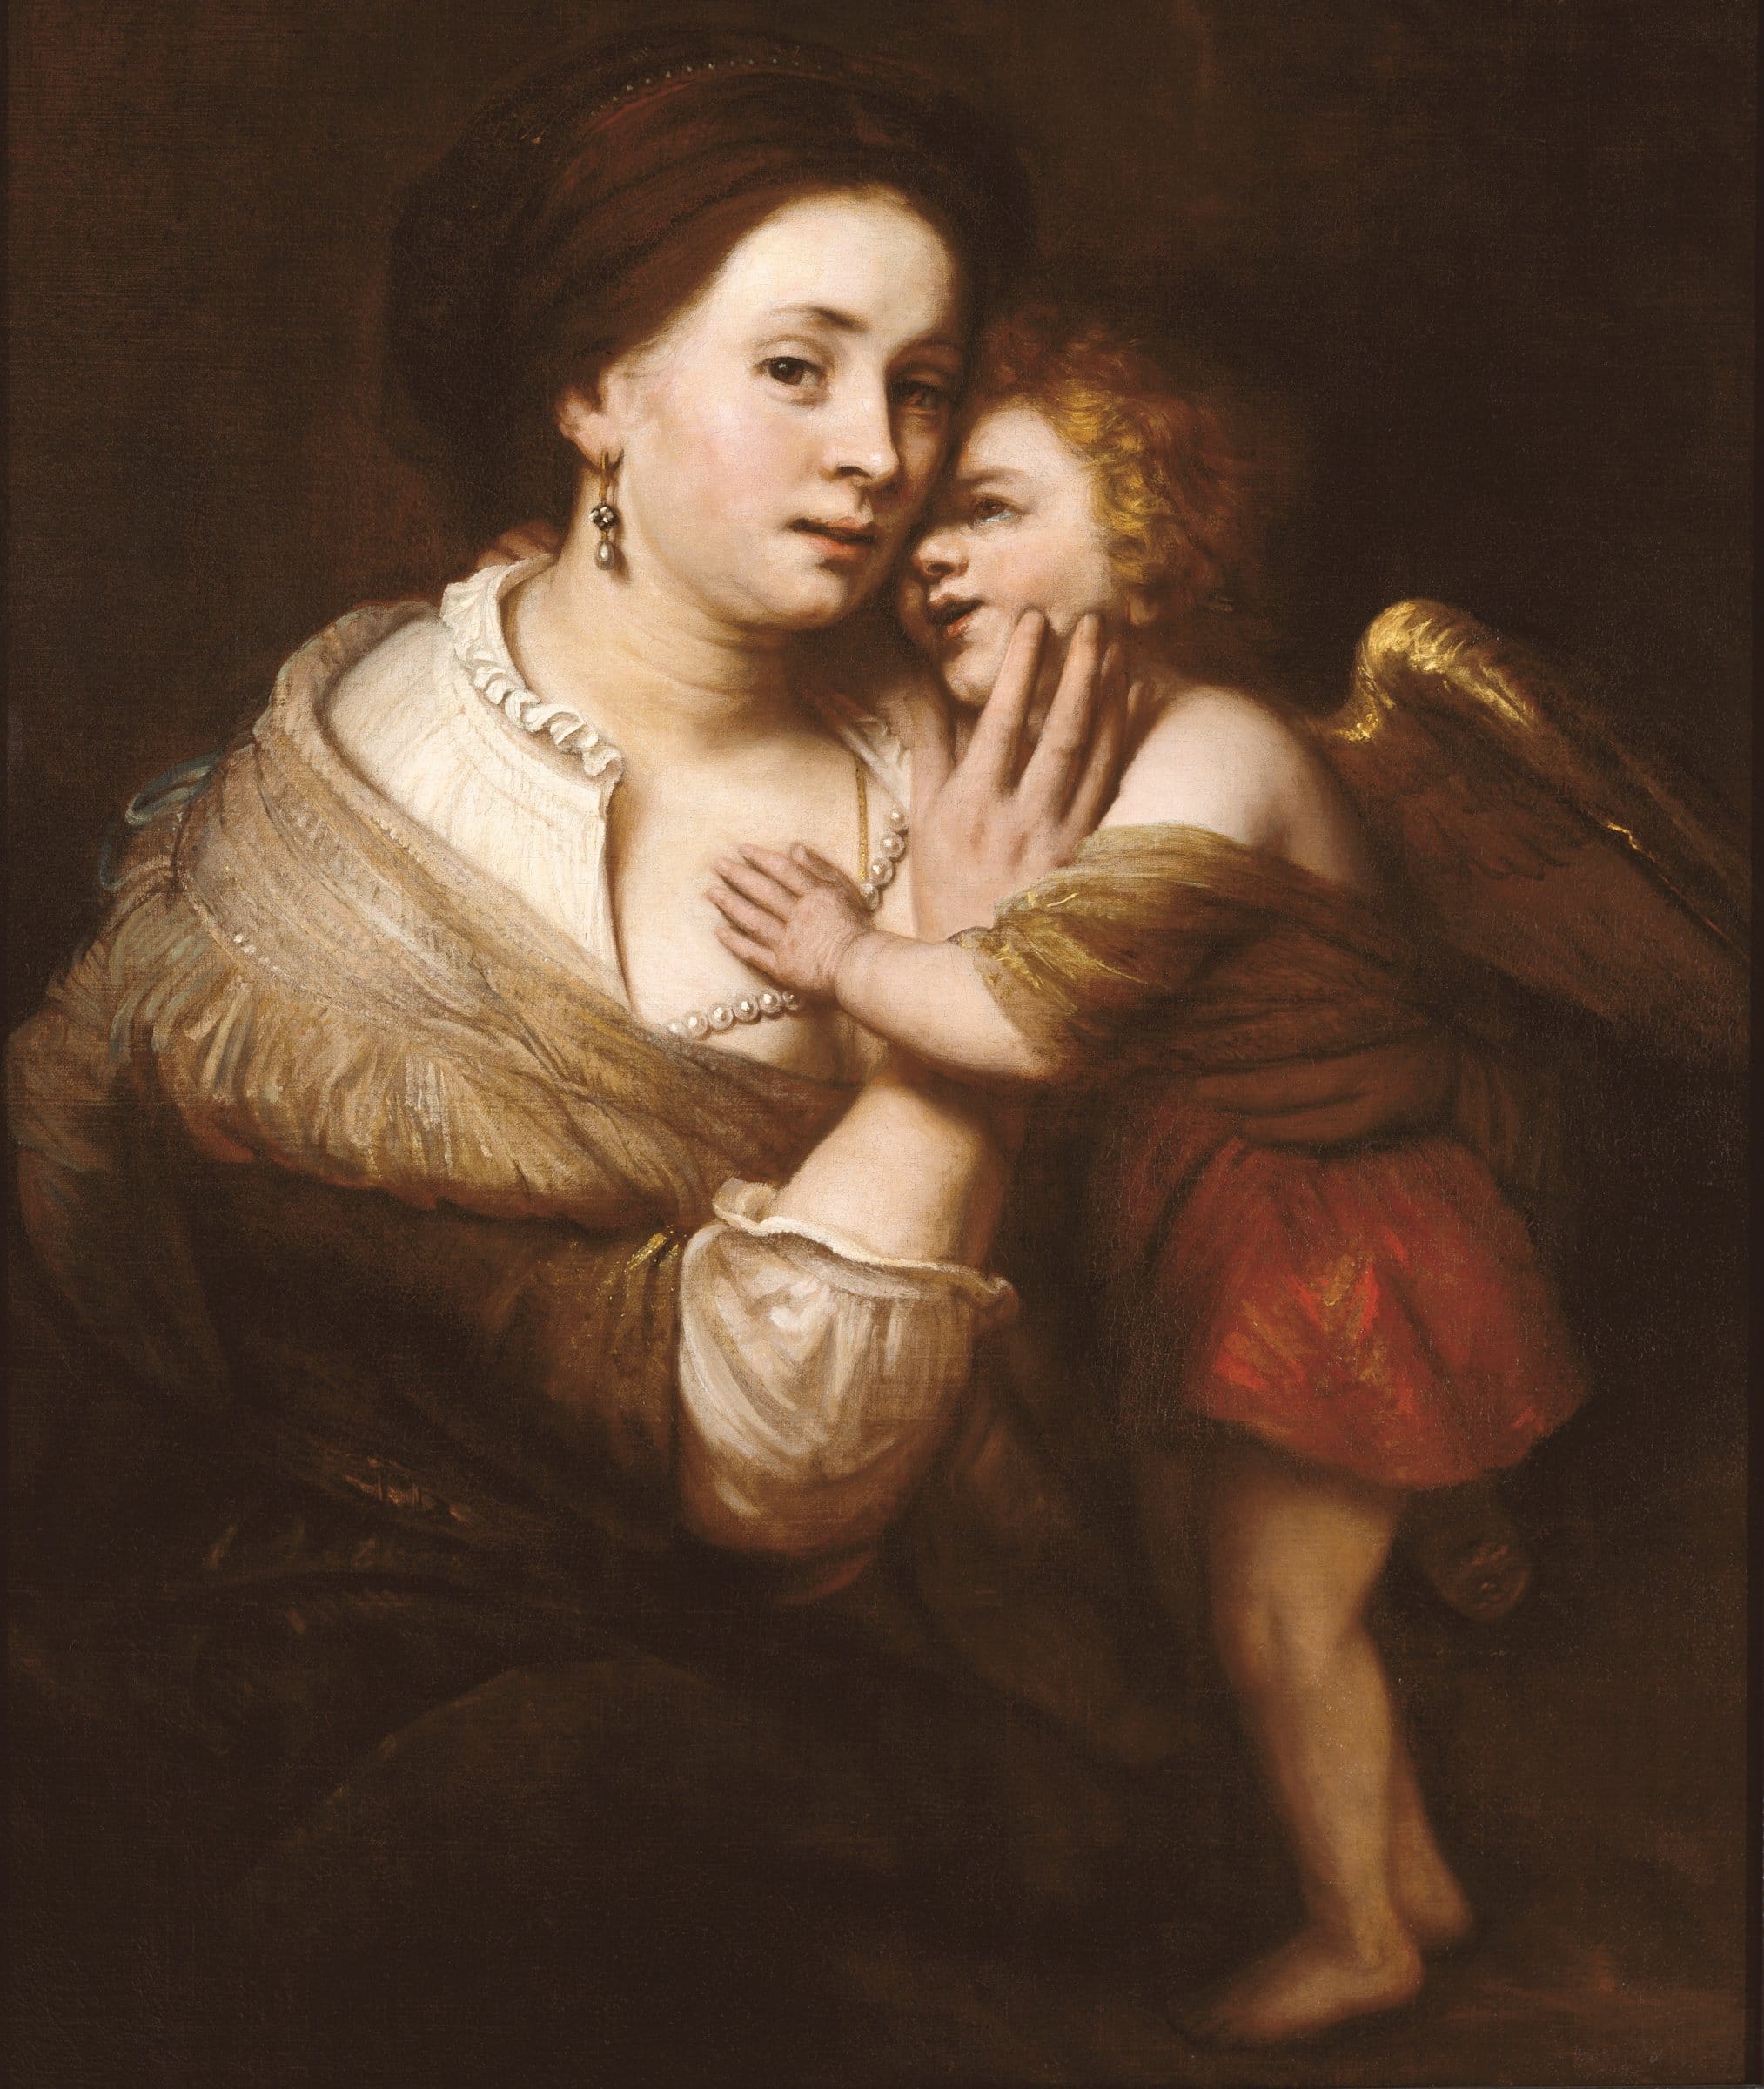 A woman wearing silk gown is seated while holding a winged child whose head rests against her cheek and hand on her chest.